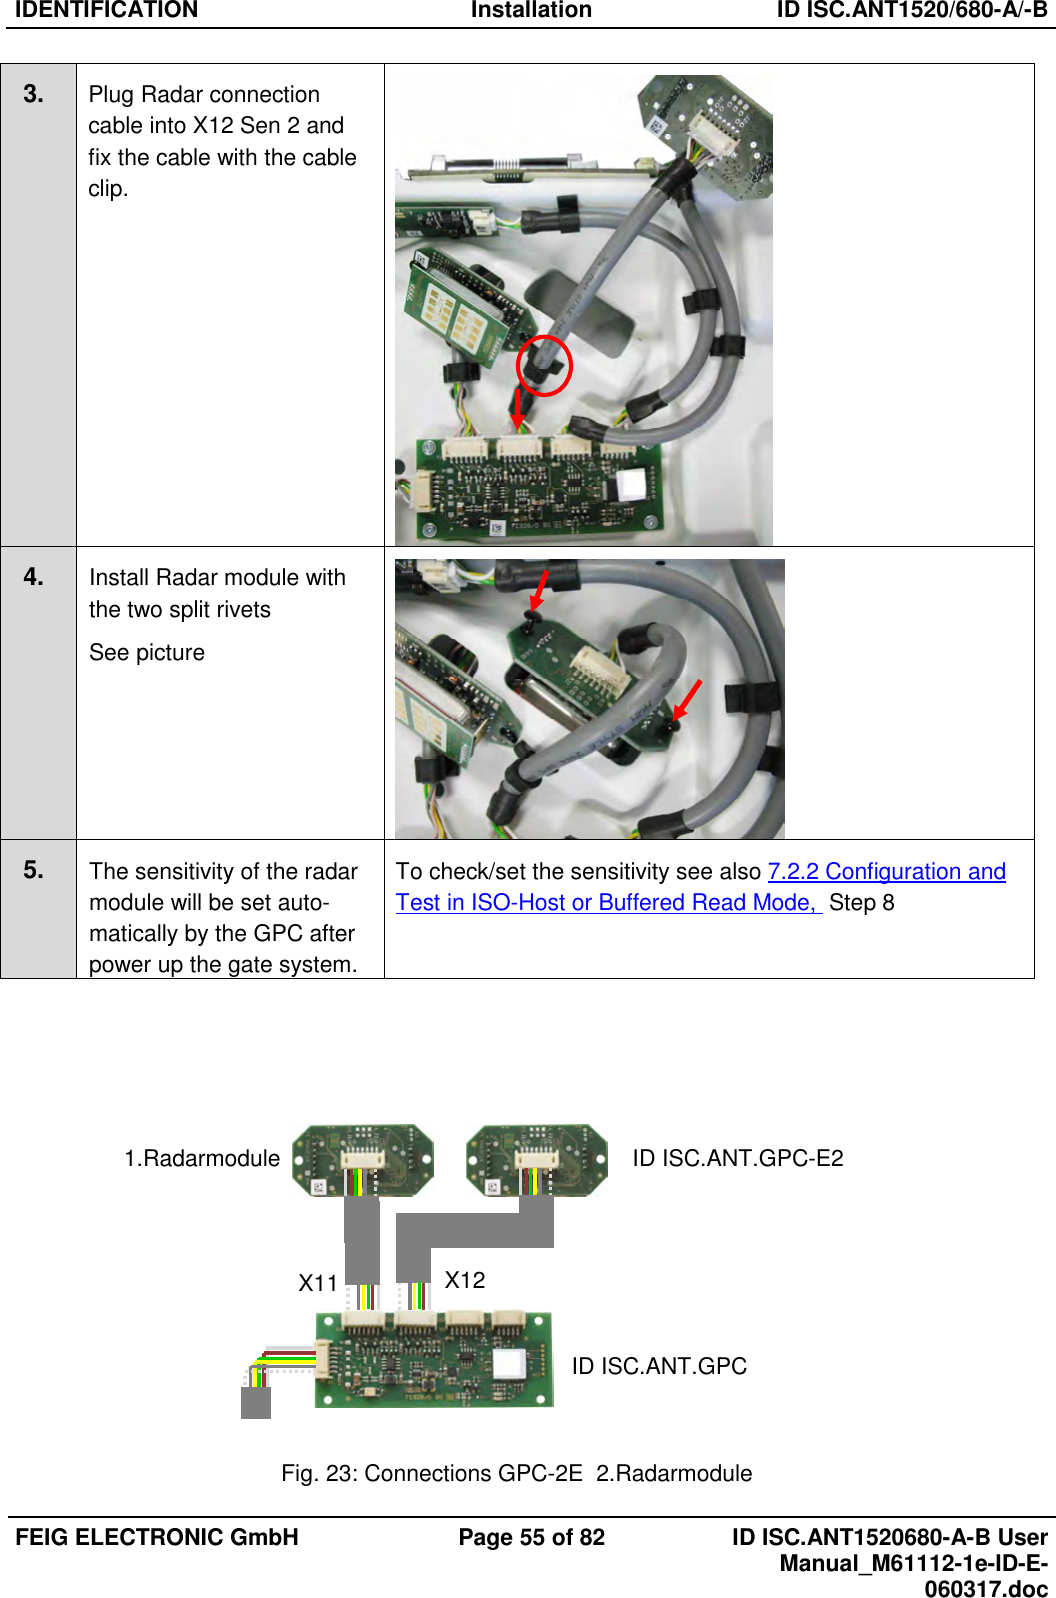 IDENTIFICATION  Installation  ID ISC.ANT1520/680-A/-B  FEIG ELECTRONIC GmbH  Page 55 of 82  ID ISC.ANT1520680-A-B User Manual_M61112-1e-ID-E-060317.doc  3. Plug Radar connection  cable into X12 Sen 2 and fix the cable with the cable clip.   4. Install Radar module with the two split rivets See picture  5. The sensitivity of the radar module will be set auto- matically by the GPC after power up the gate system. To check/set the sensitivity see also 7.2.2 Configuration and Test in ISO-Host or Buffered Read Mode,  Step 8            Fig. 23: Connections GPC-2E  2.Radarmodule ID ISC.ANT.GPC-E2 ID ISC.ANT.GPC 1.Radarmodule X11  X12 